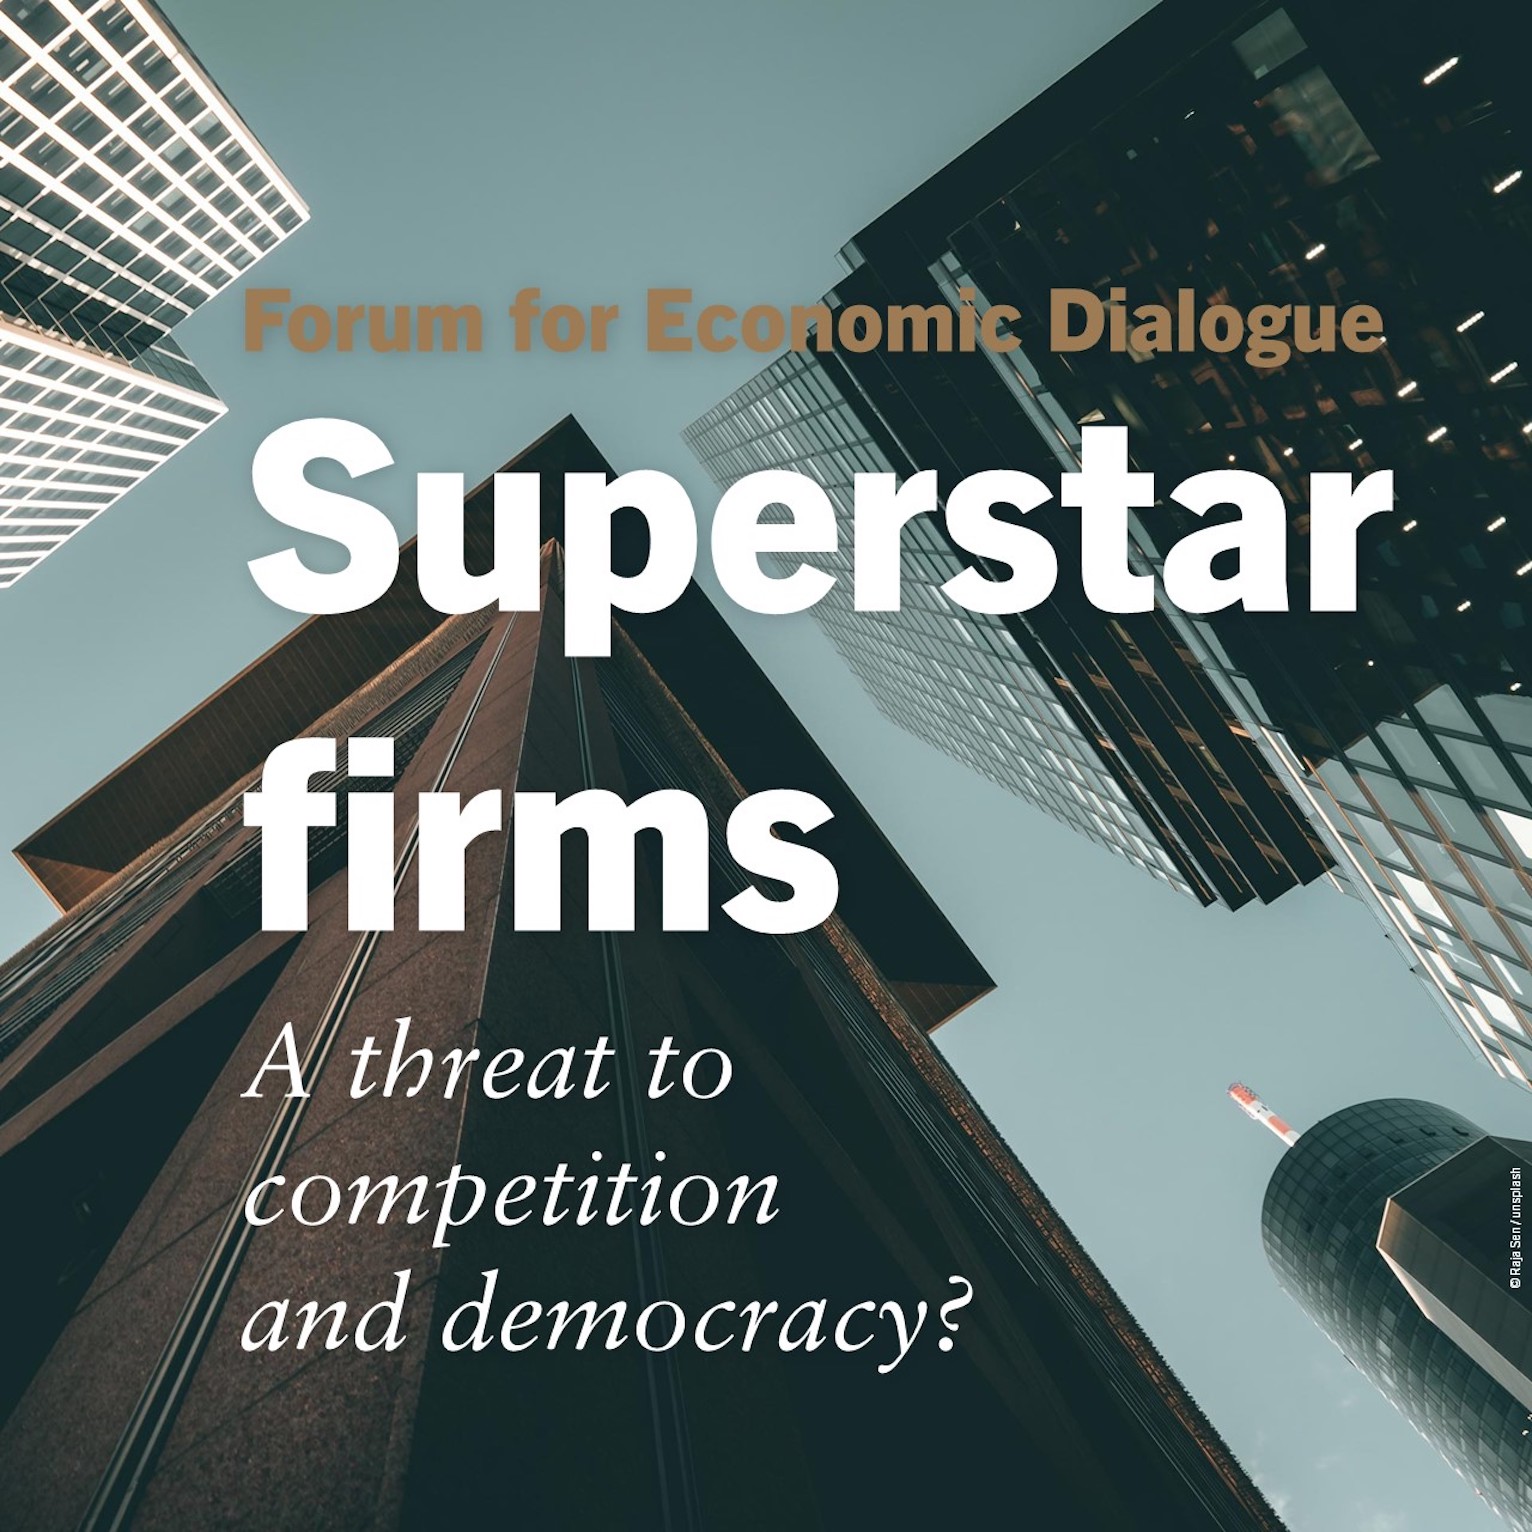 Superstar firms – A threat to competition and democracy? © Raja Sen / unsplash